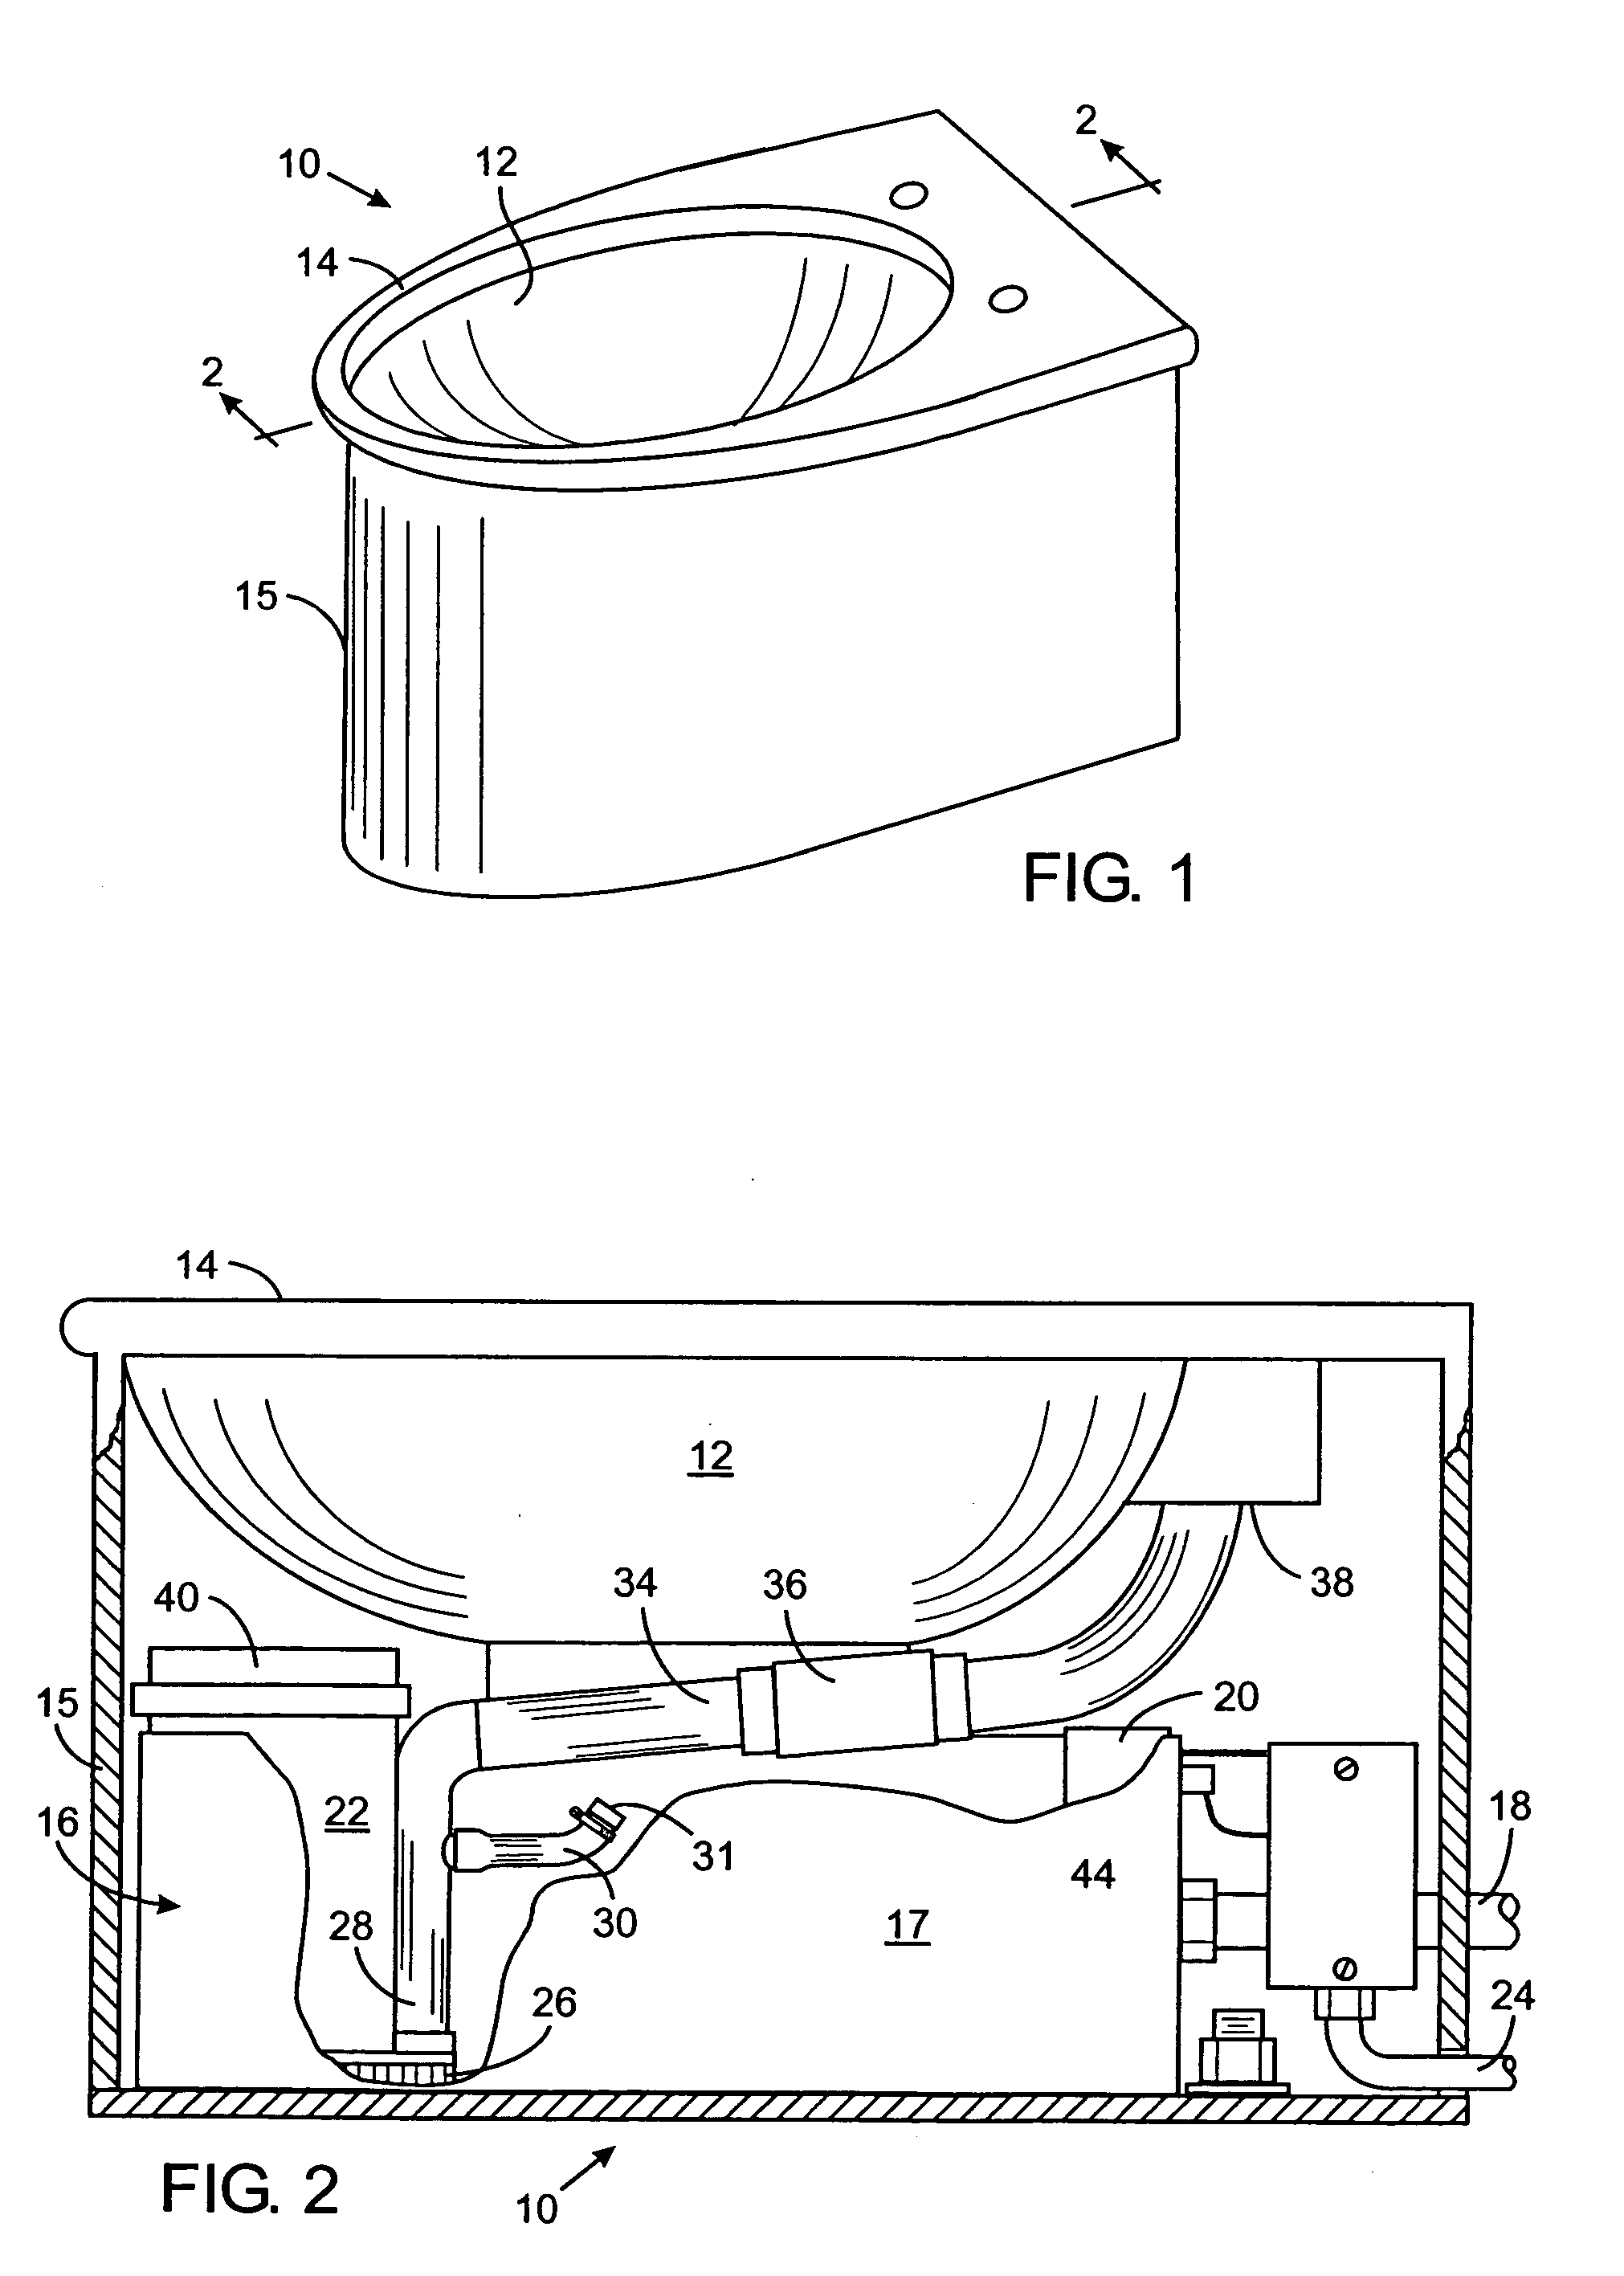 Control system for pump operated plumbing fixtures